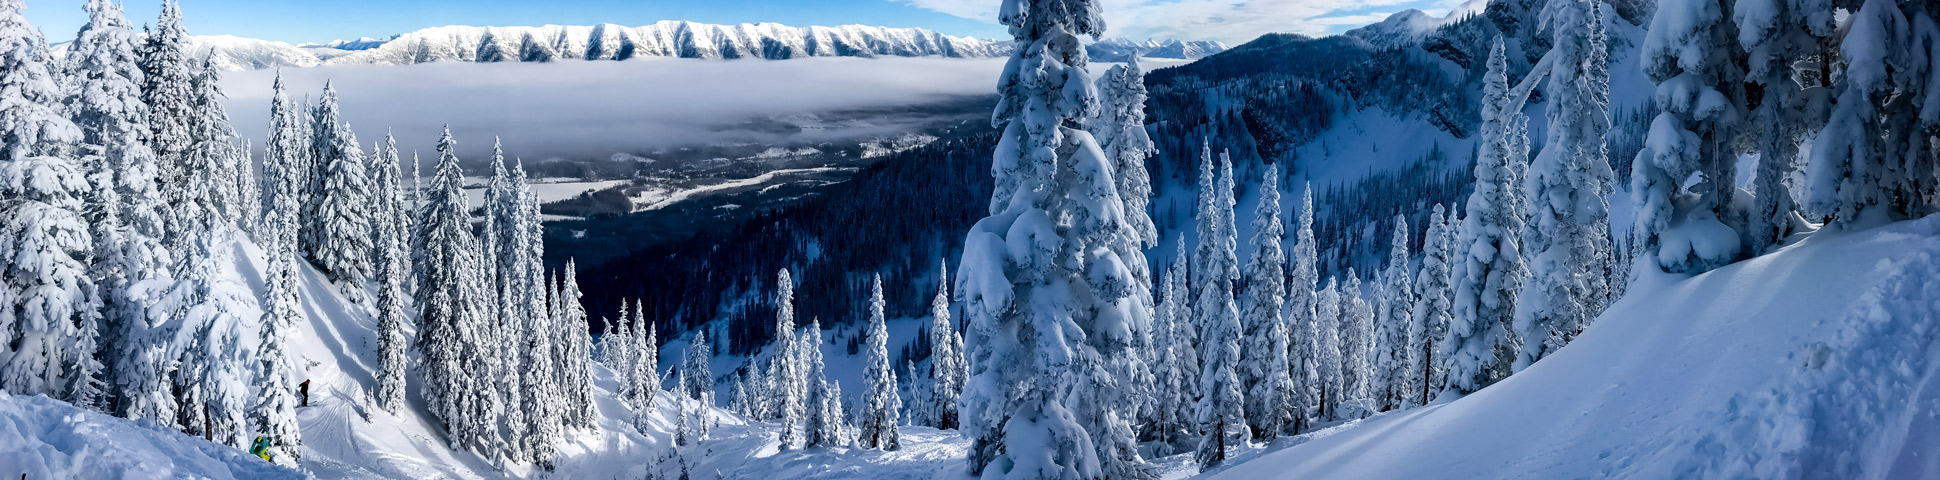 Panoramic views from 9-Day Rocky Mountain Skiing Tour